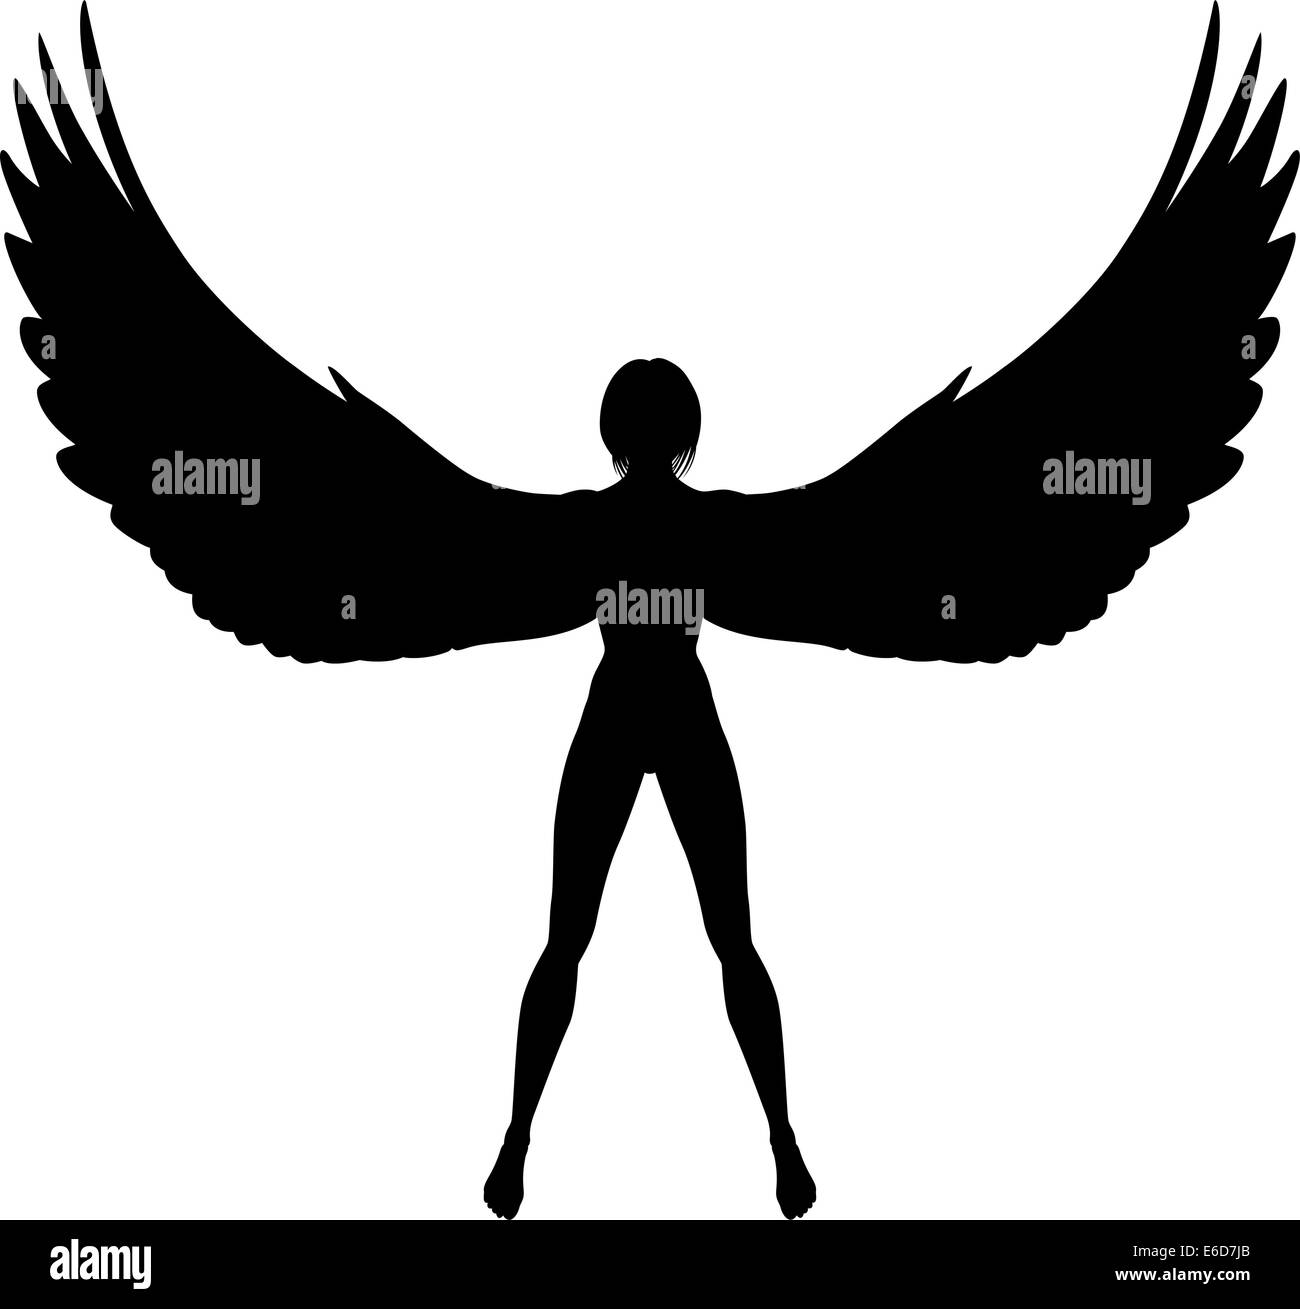 Editable vector silhouette of a woman or angel with wings Stock Vector